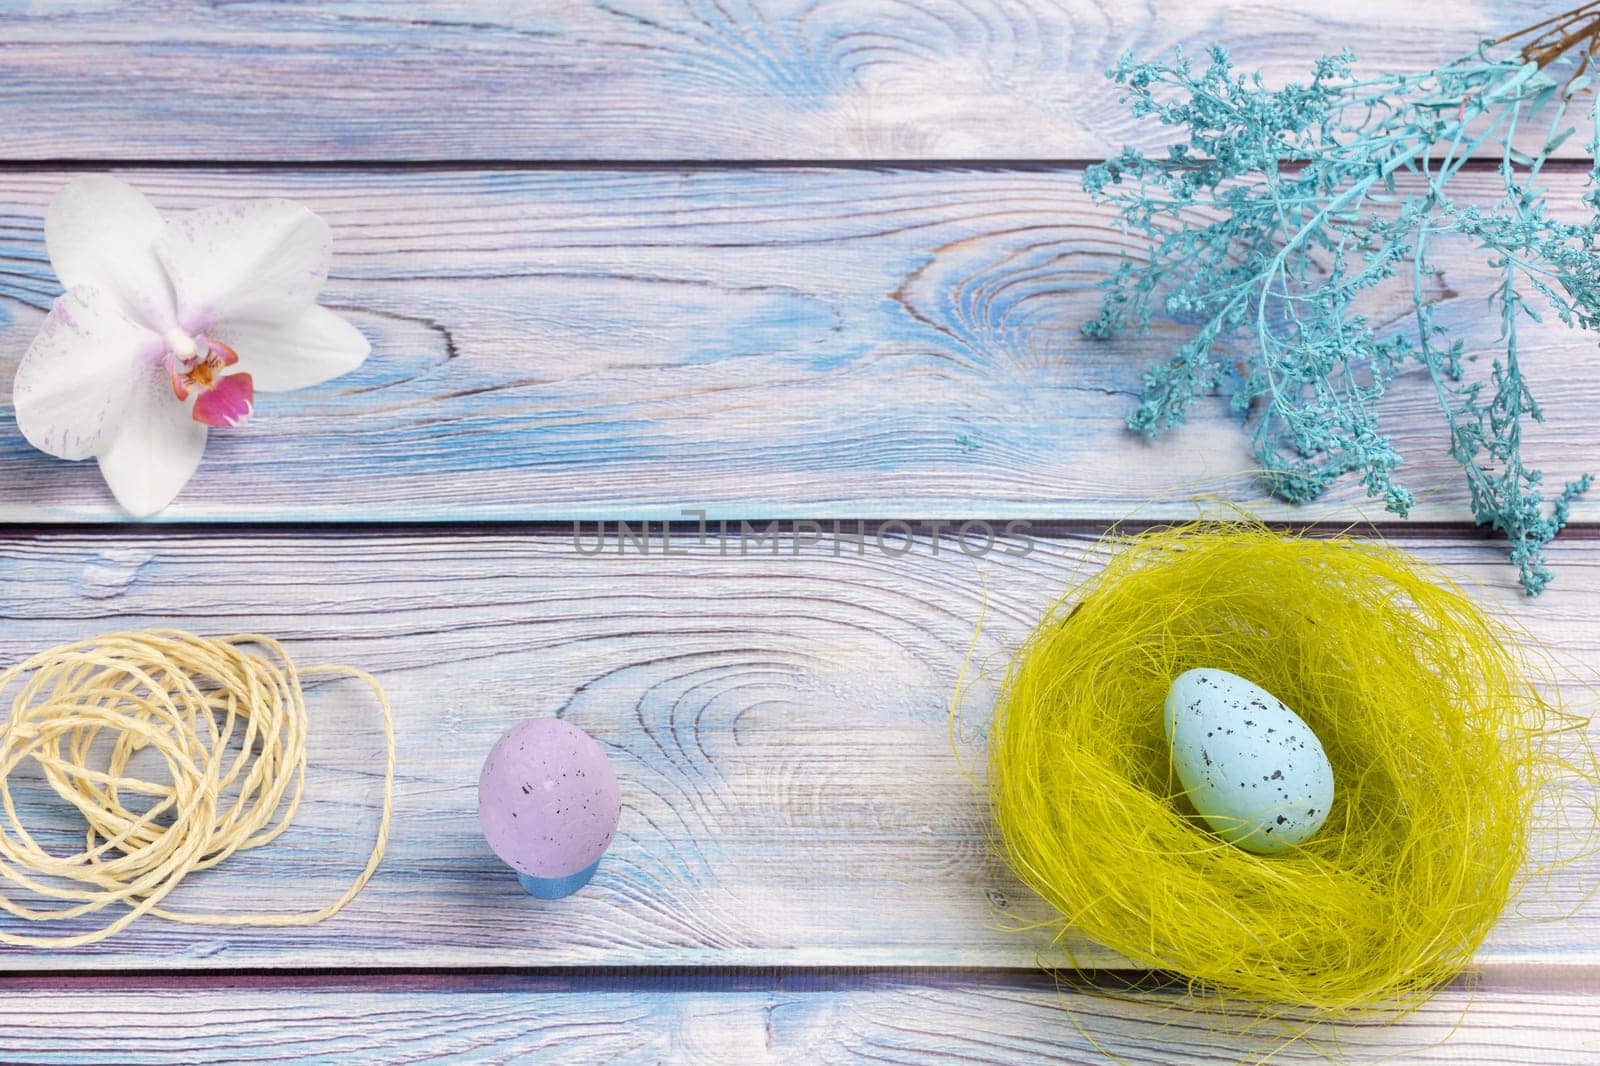 Nest with a colored Easter egg and an orchid flower on the wooden background. by mvg6894